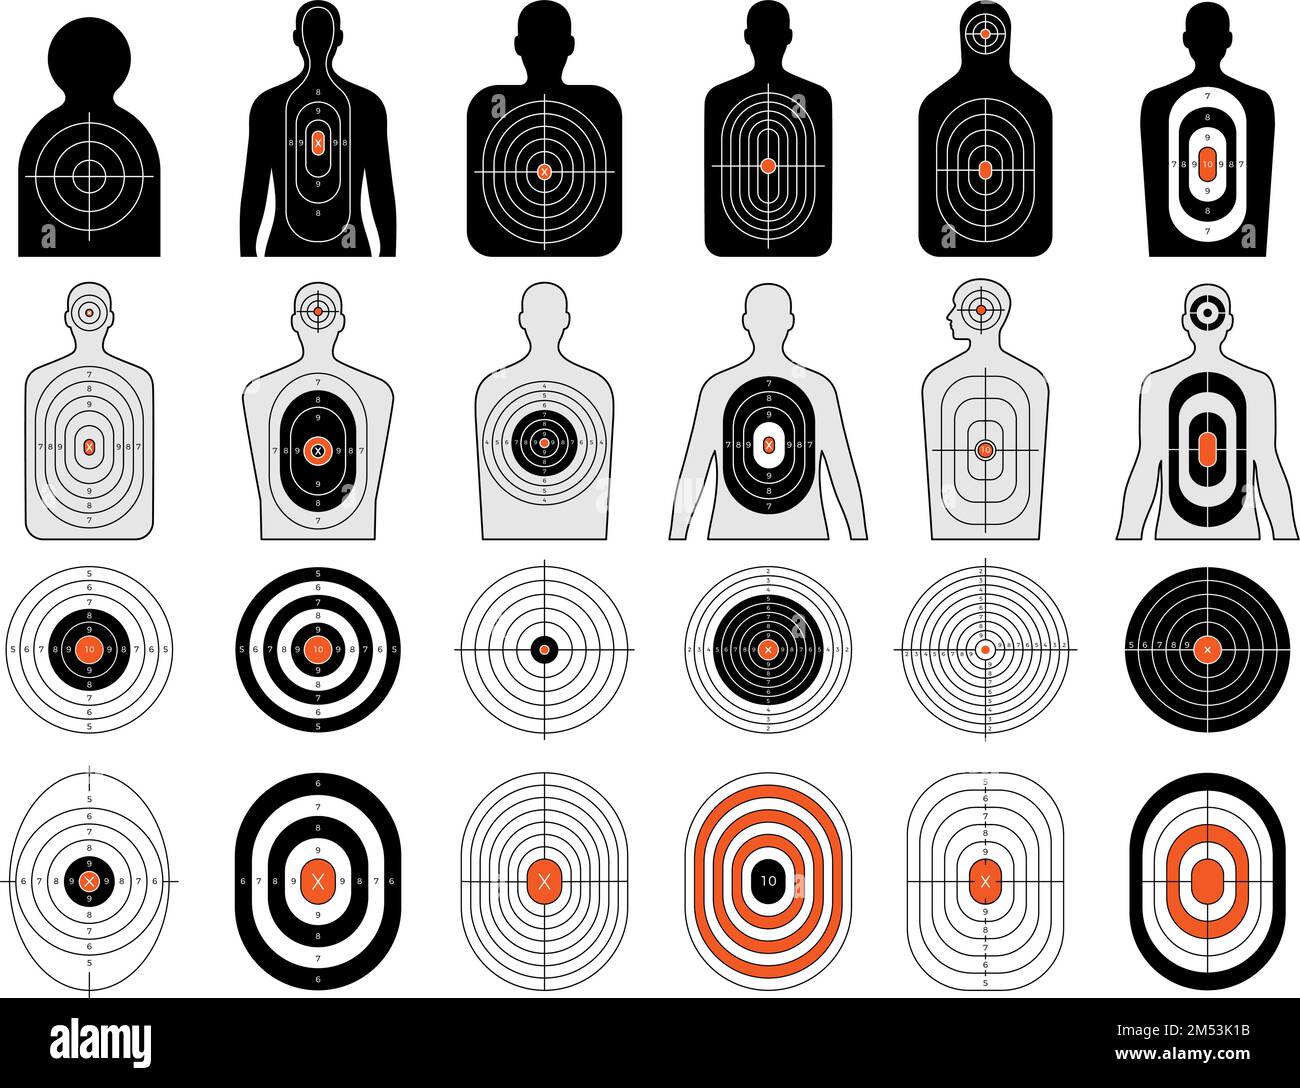 Targets Shapes Templates Forms For Shooting With Military Weapons Bows